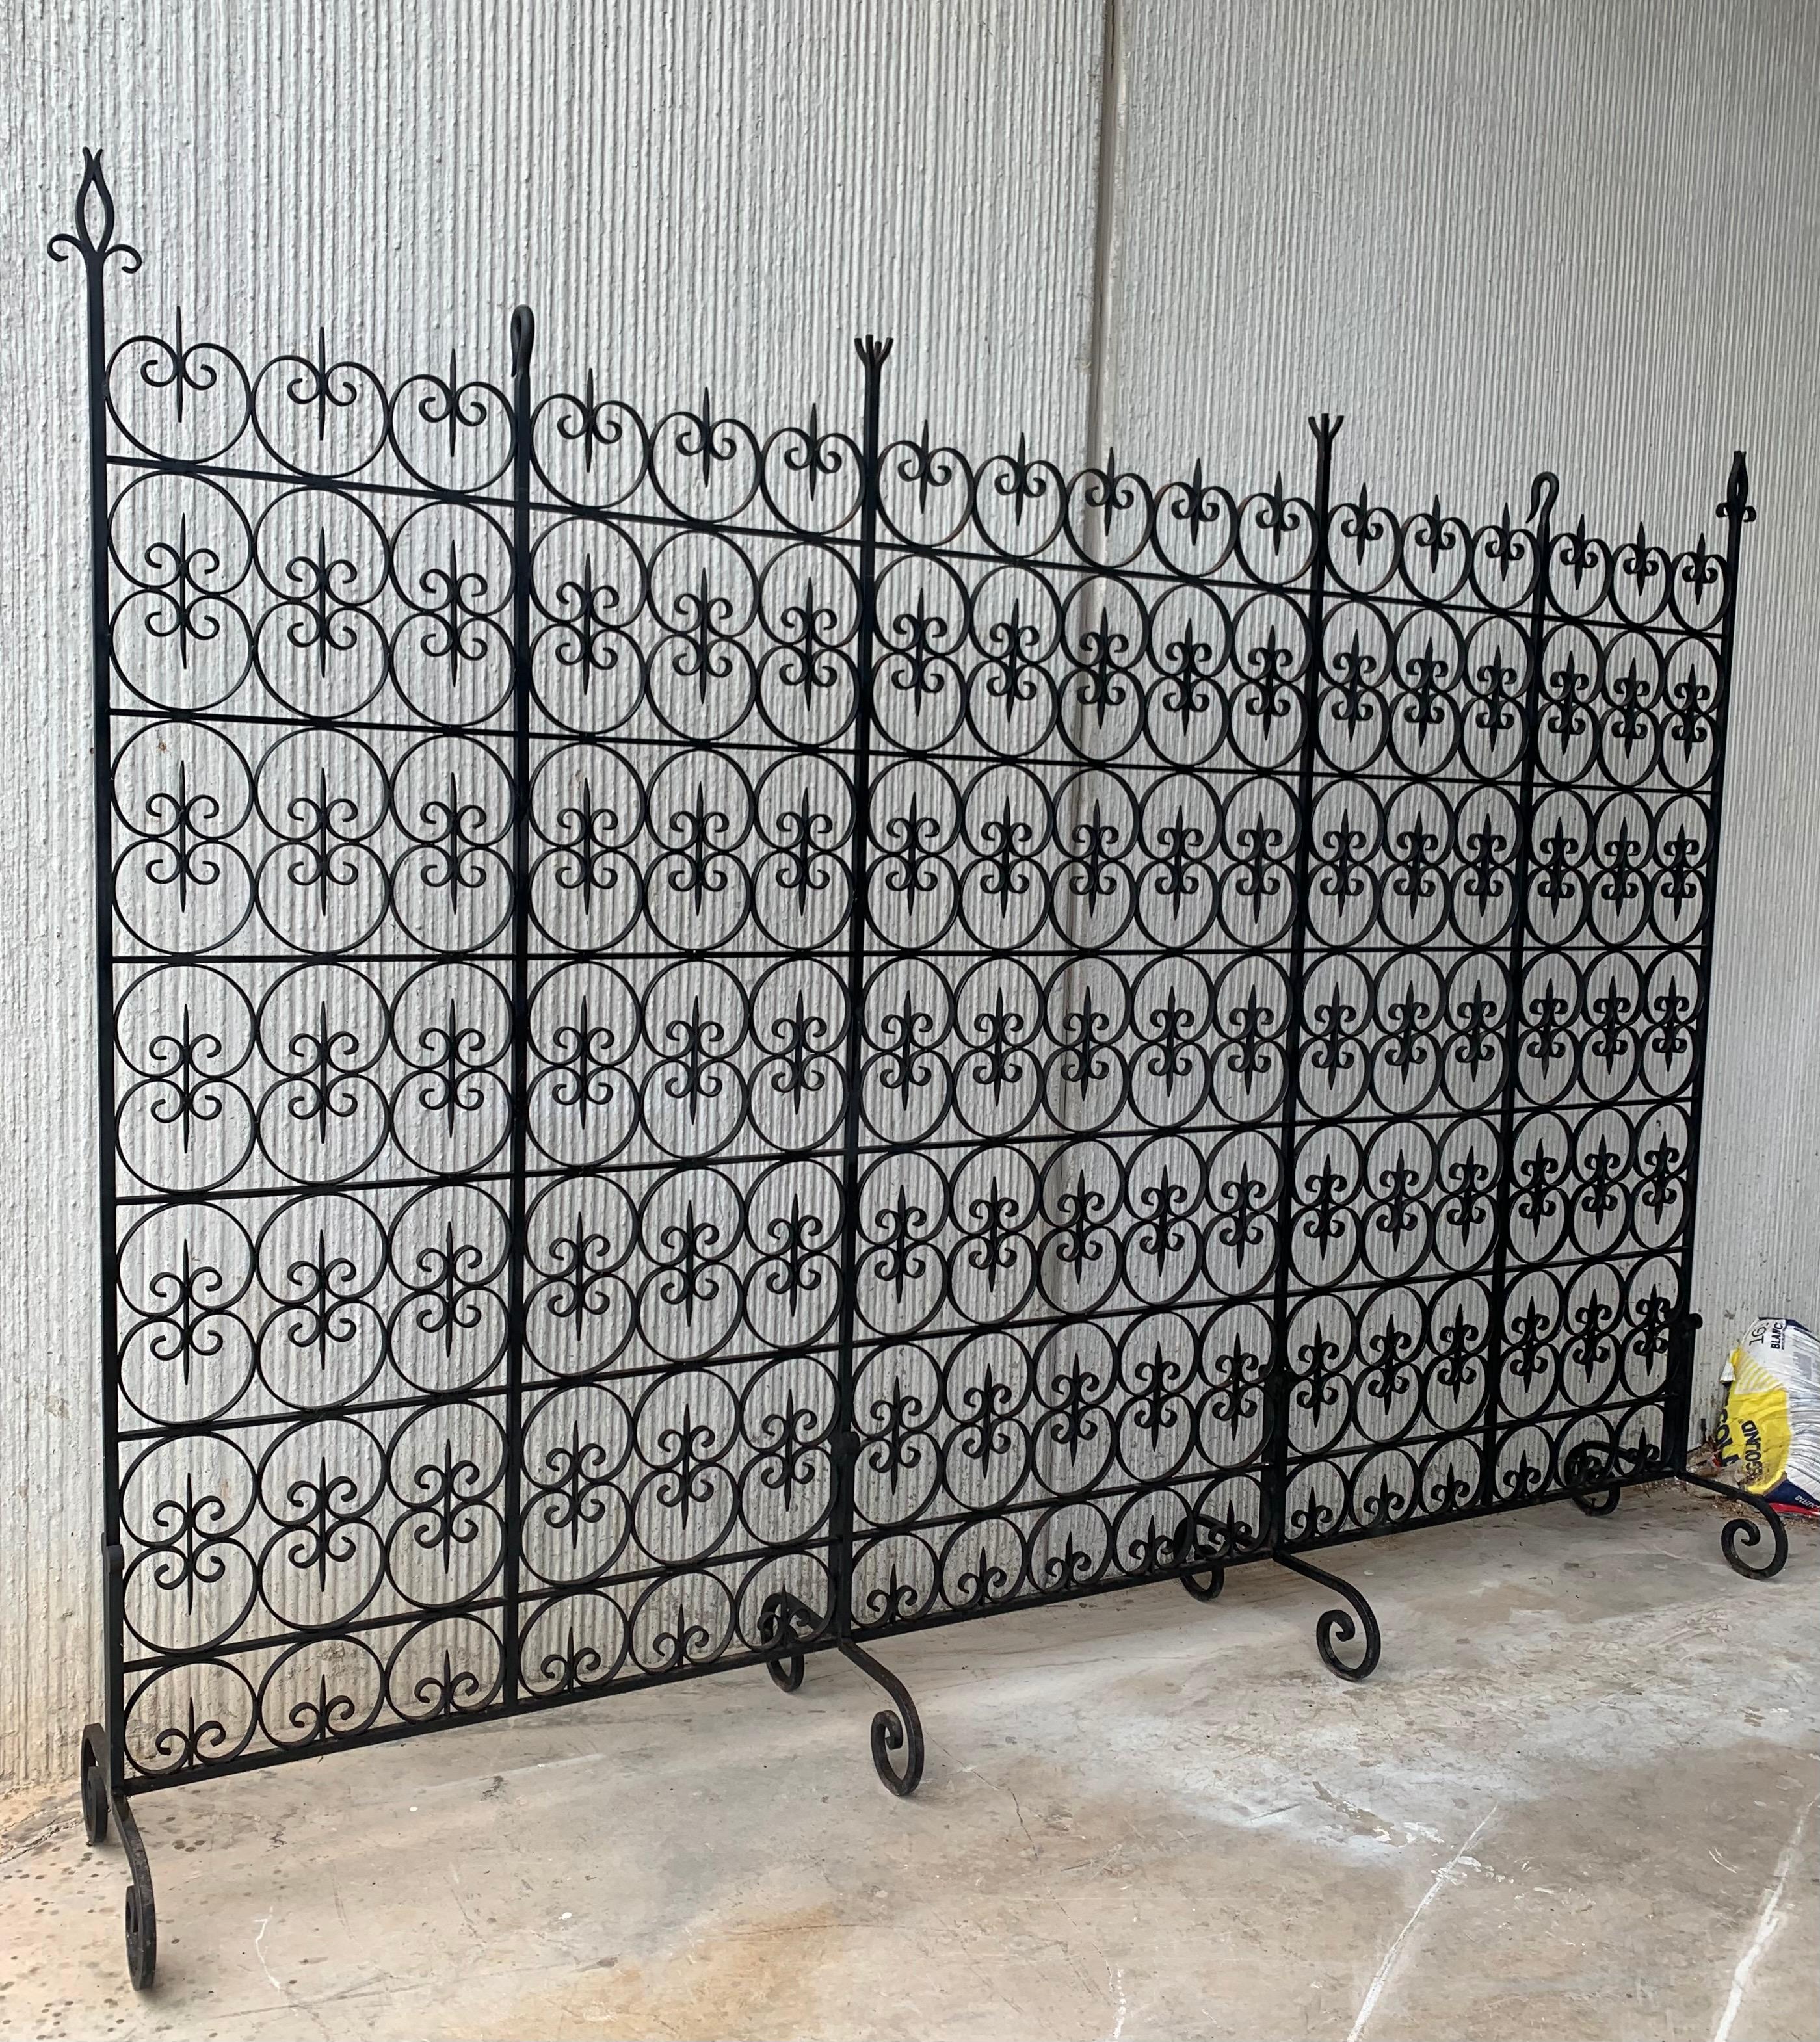 Large decorative wrought iron filigree screen room divider with four legs for a steadiness.